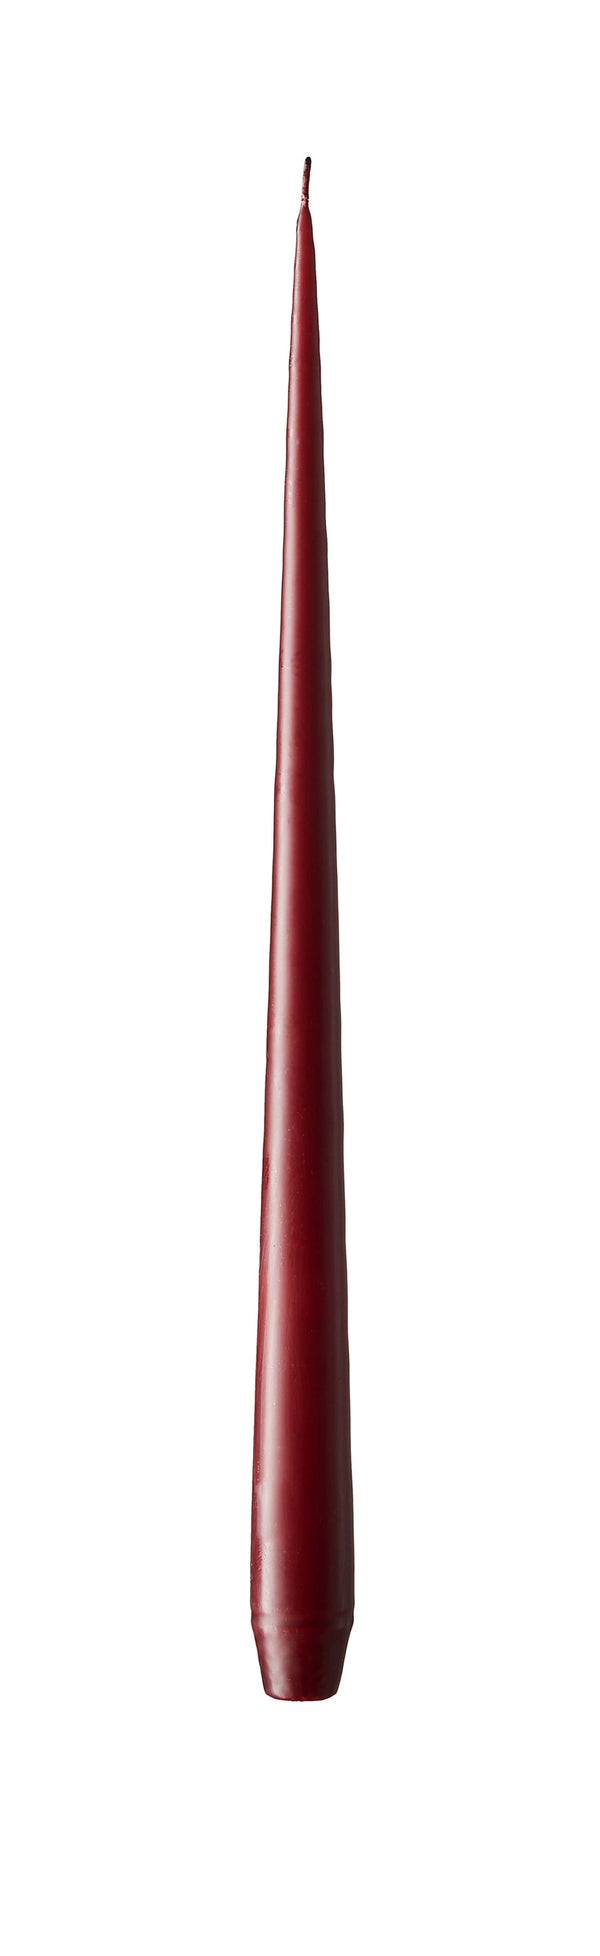 Dark red tall candle